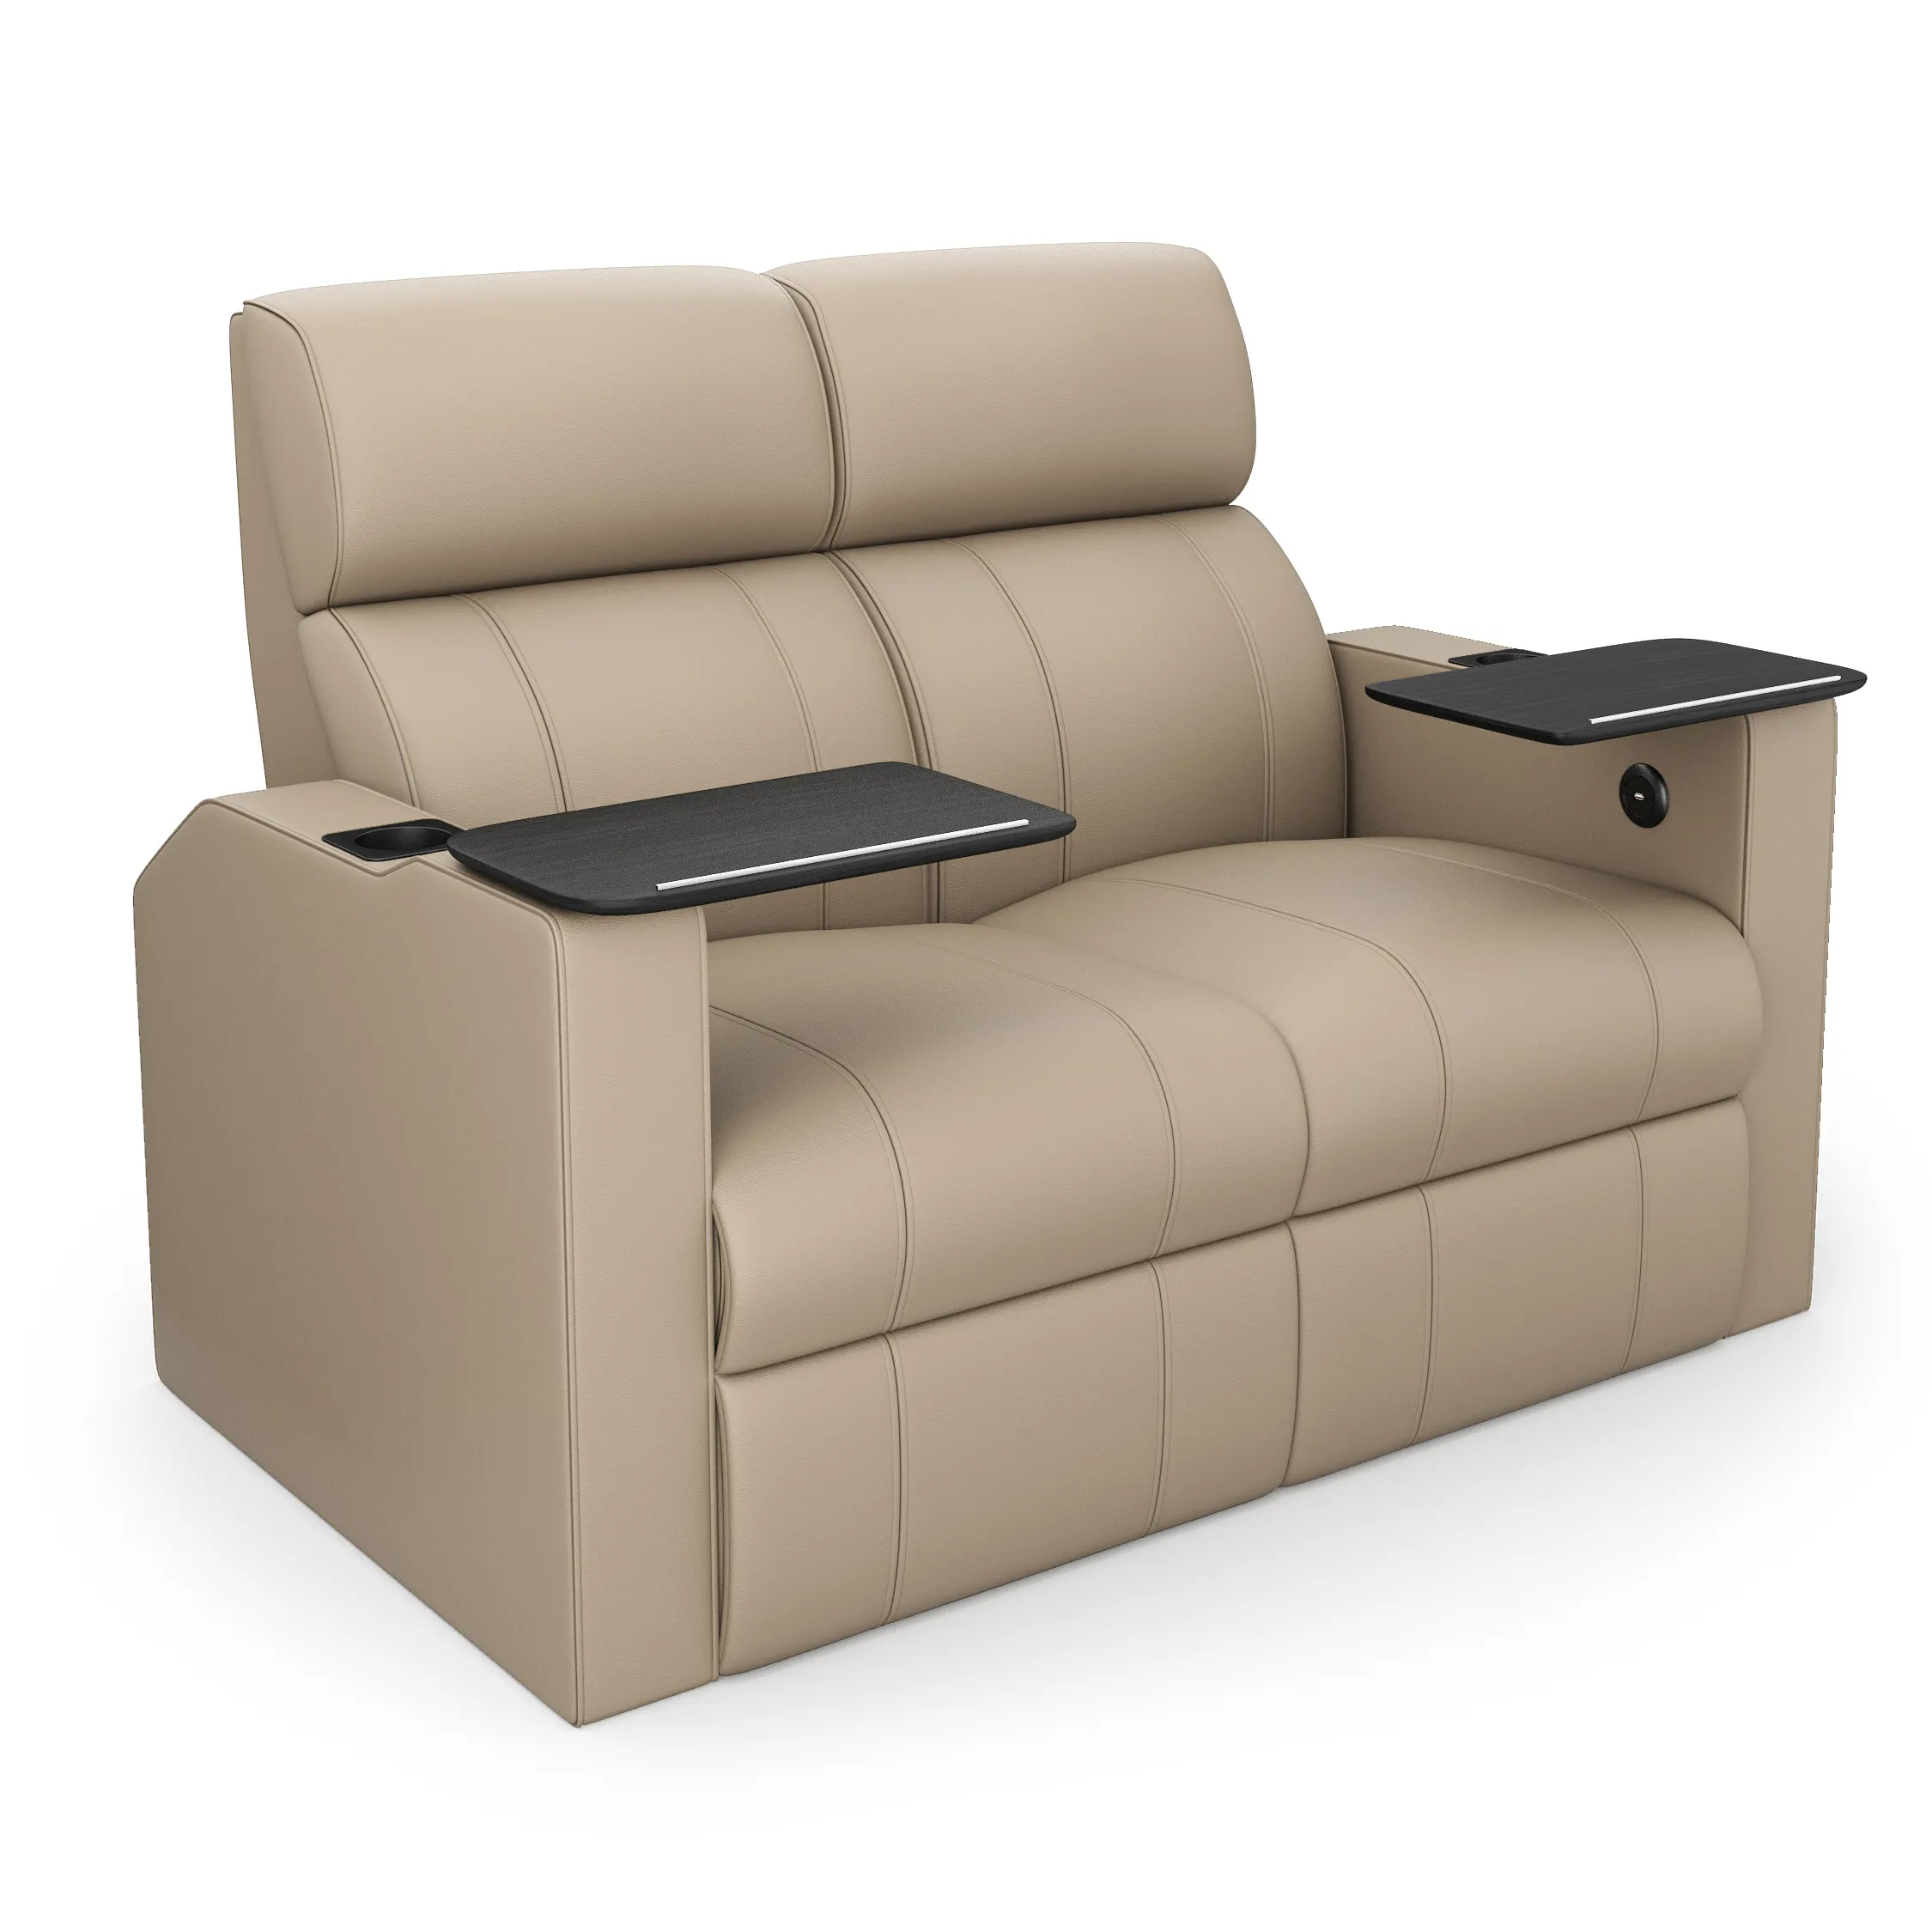 Motorized Verona Twin Recliner Synthetic Leather with Double Action Table